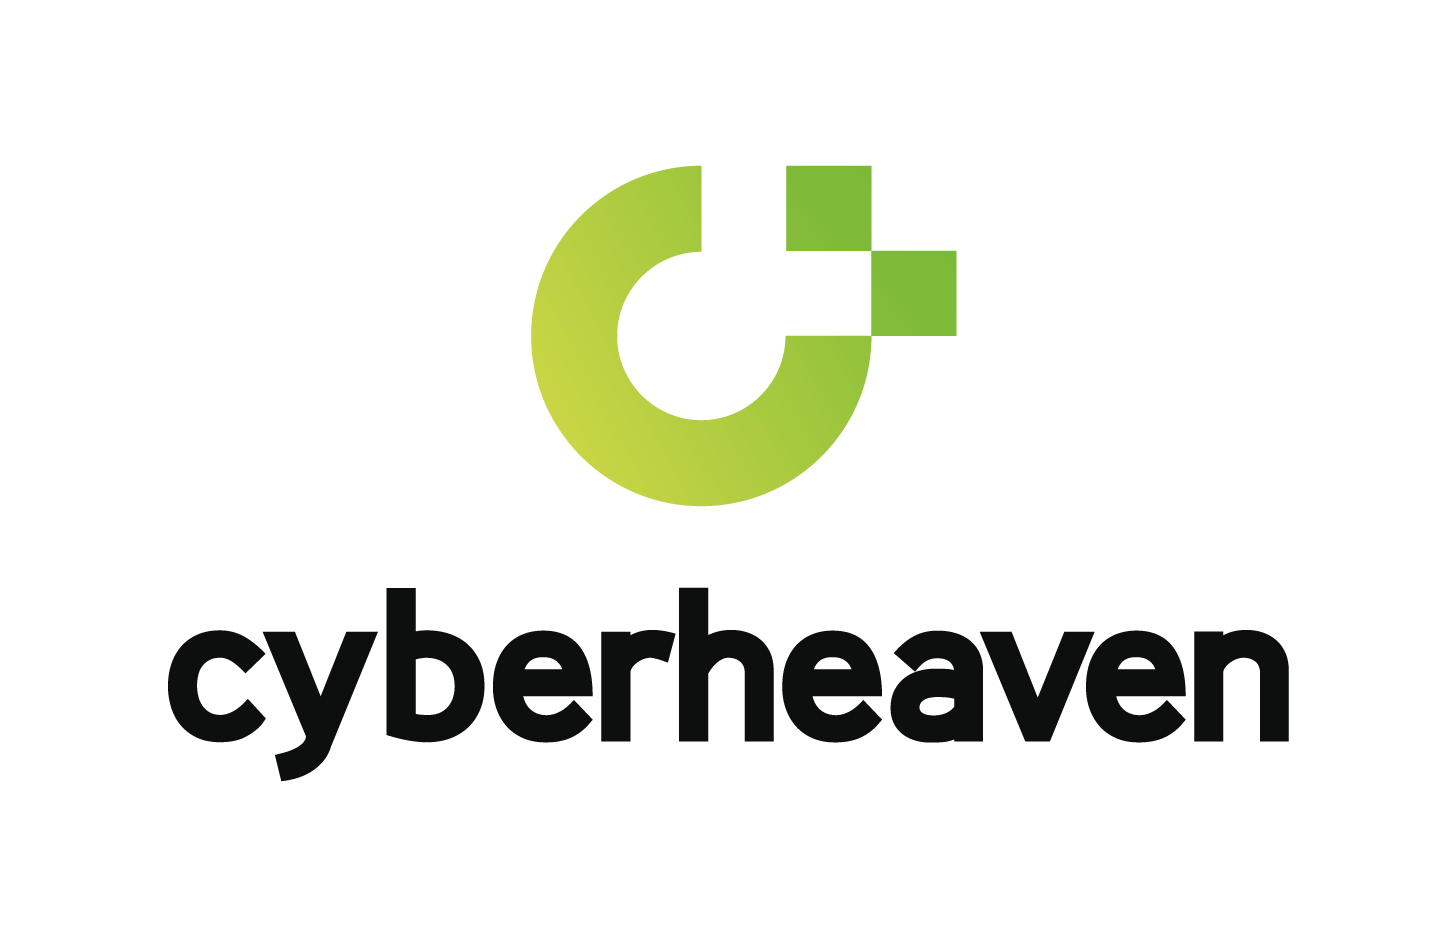 CyberHeaven’s Progress & Product Launch During a Pandemic